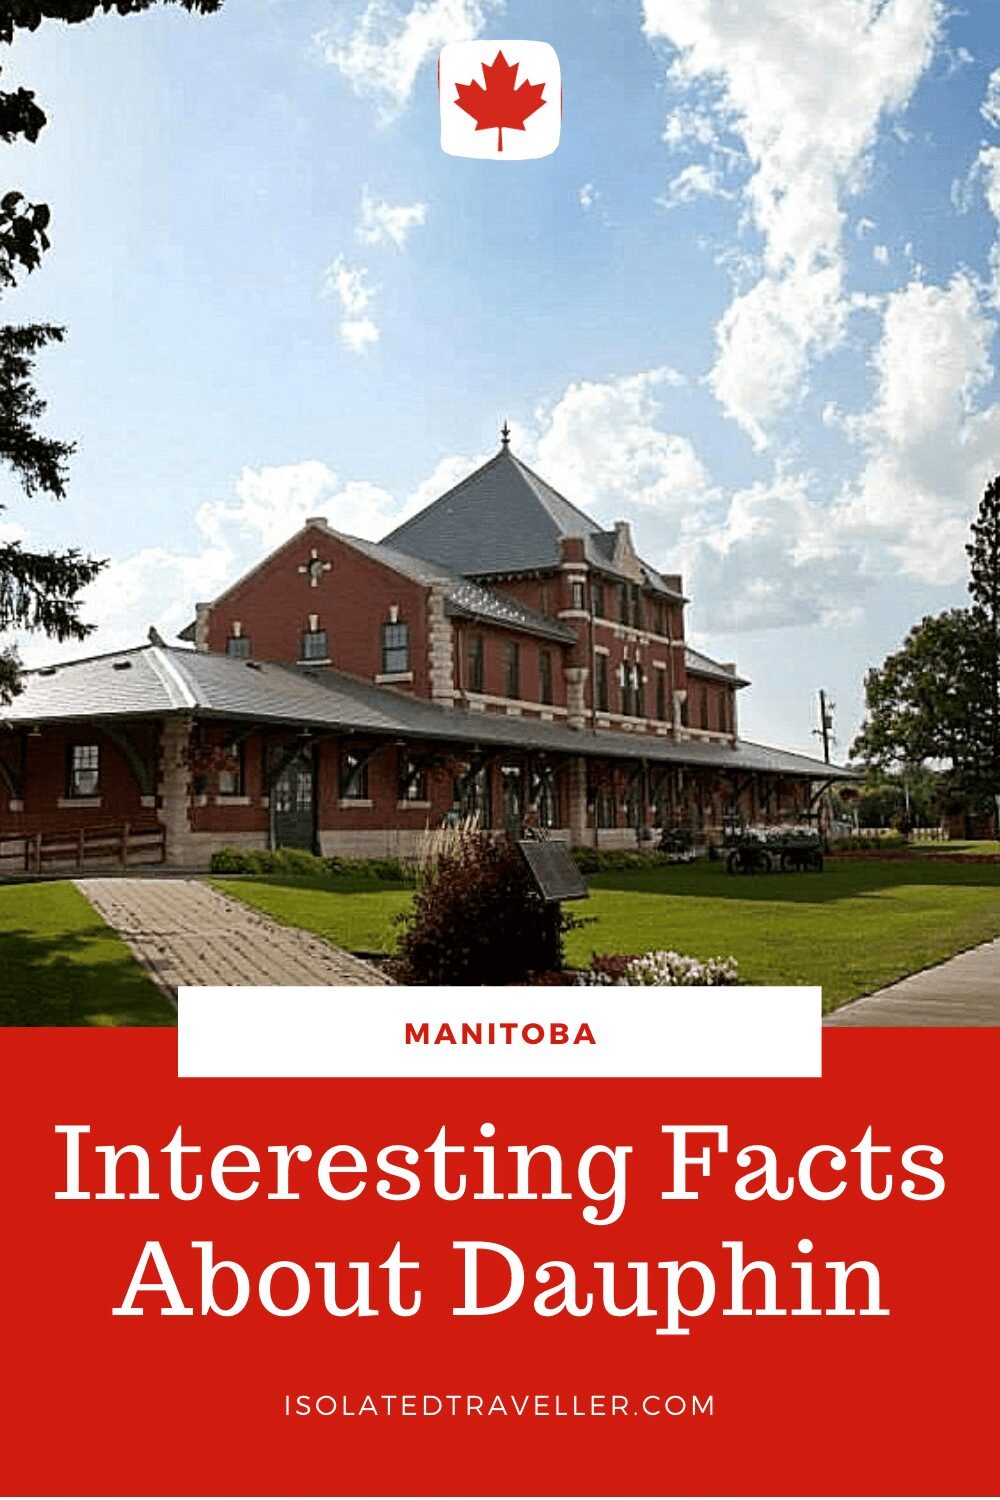 Facts About Dauphin Manitoba